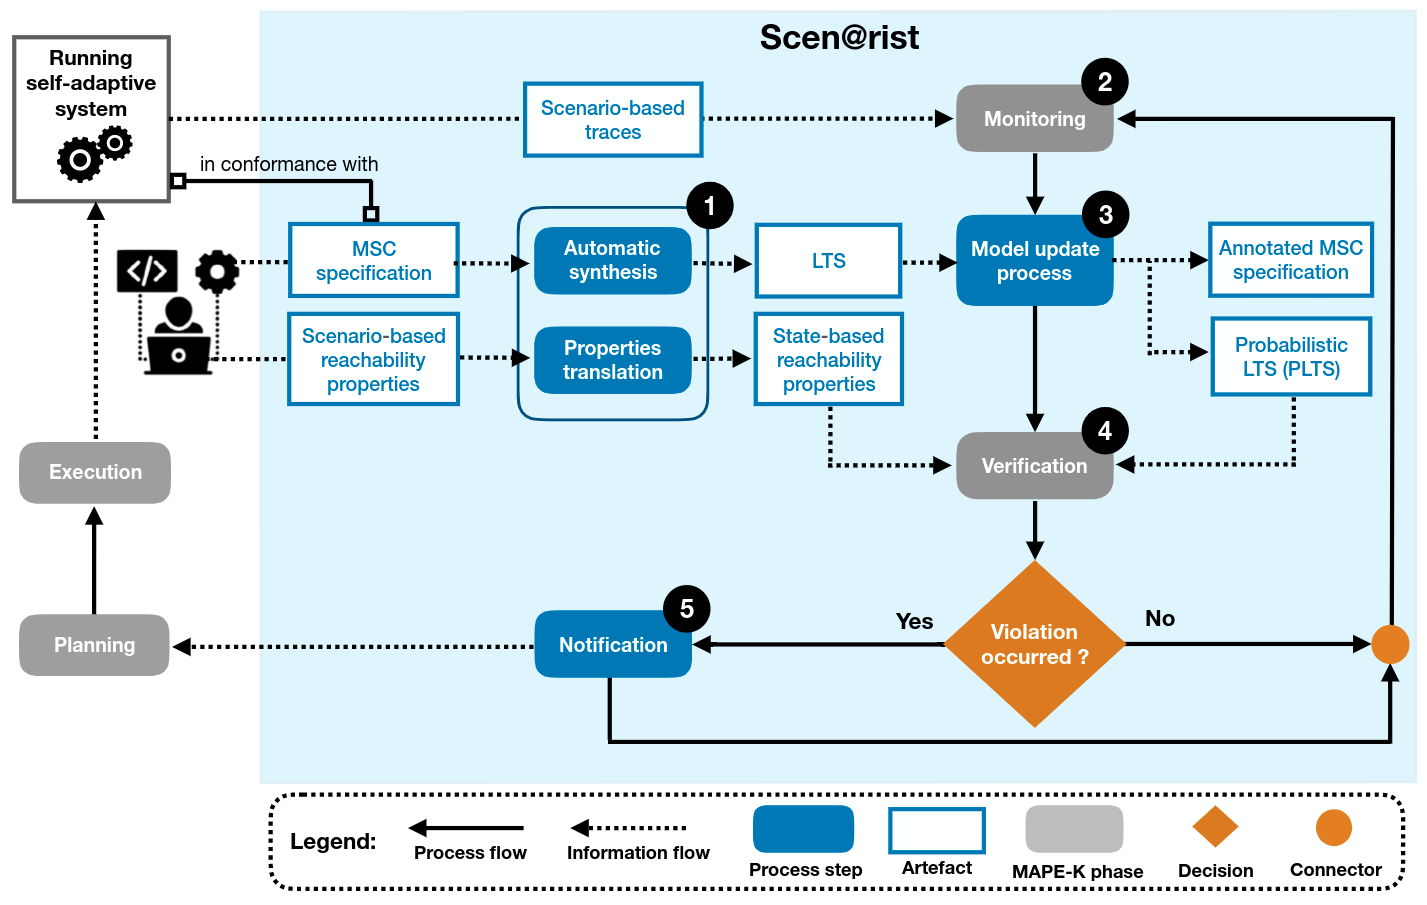 The Scen@rist overview